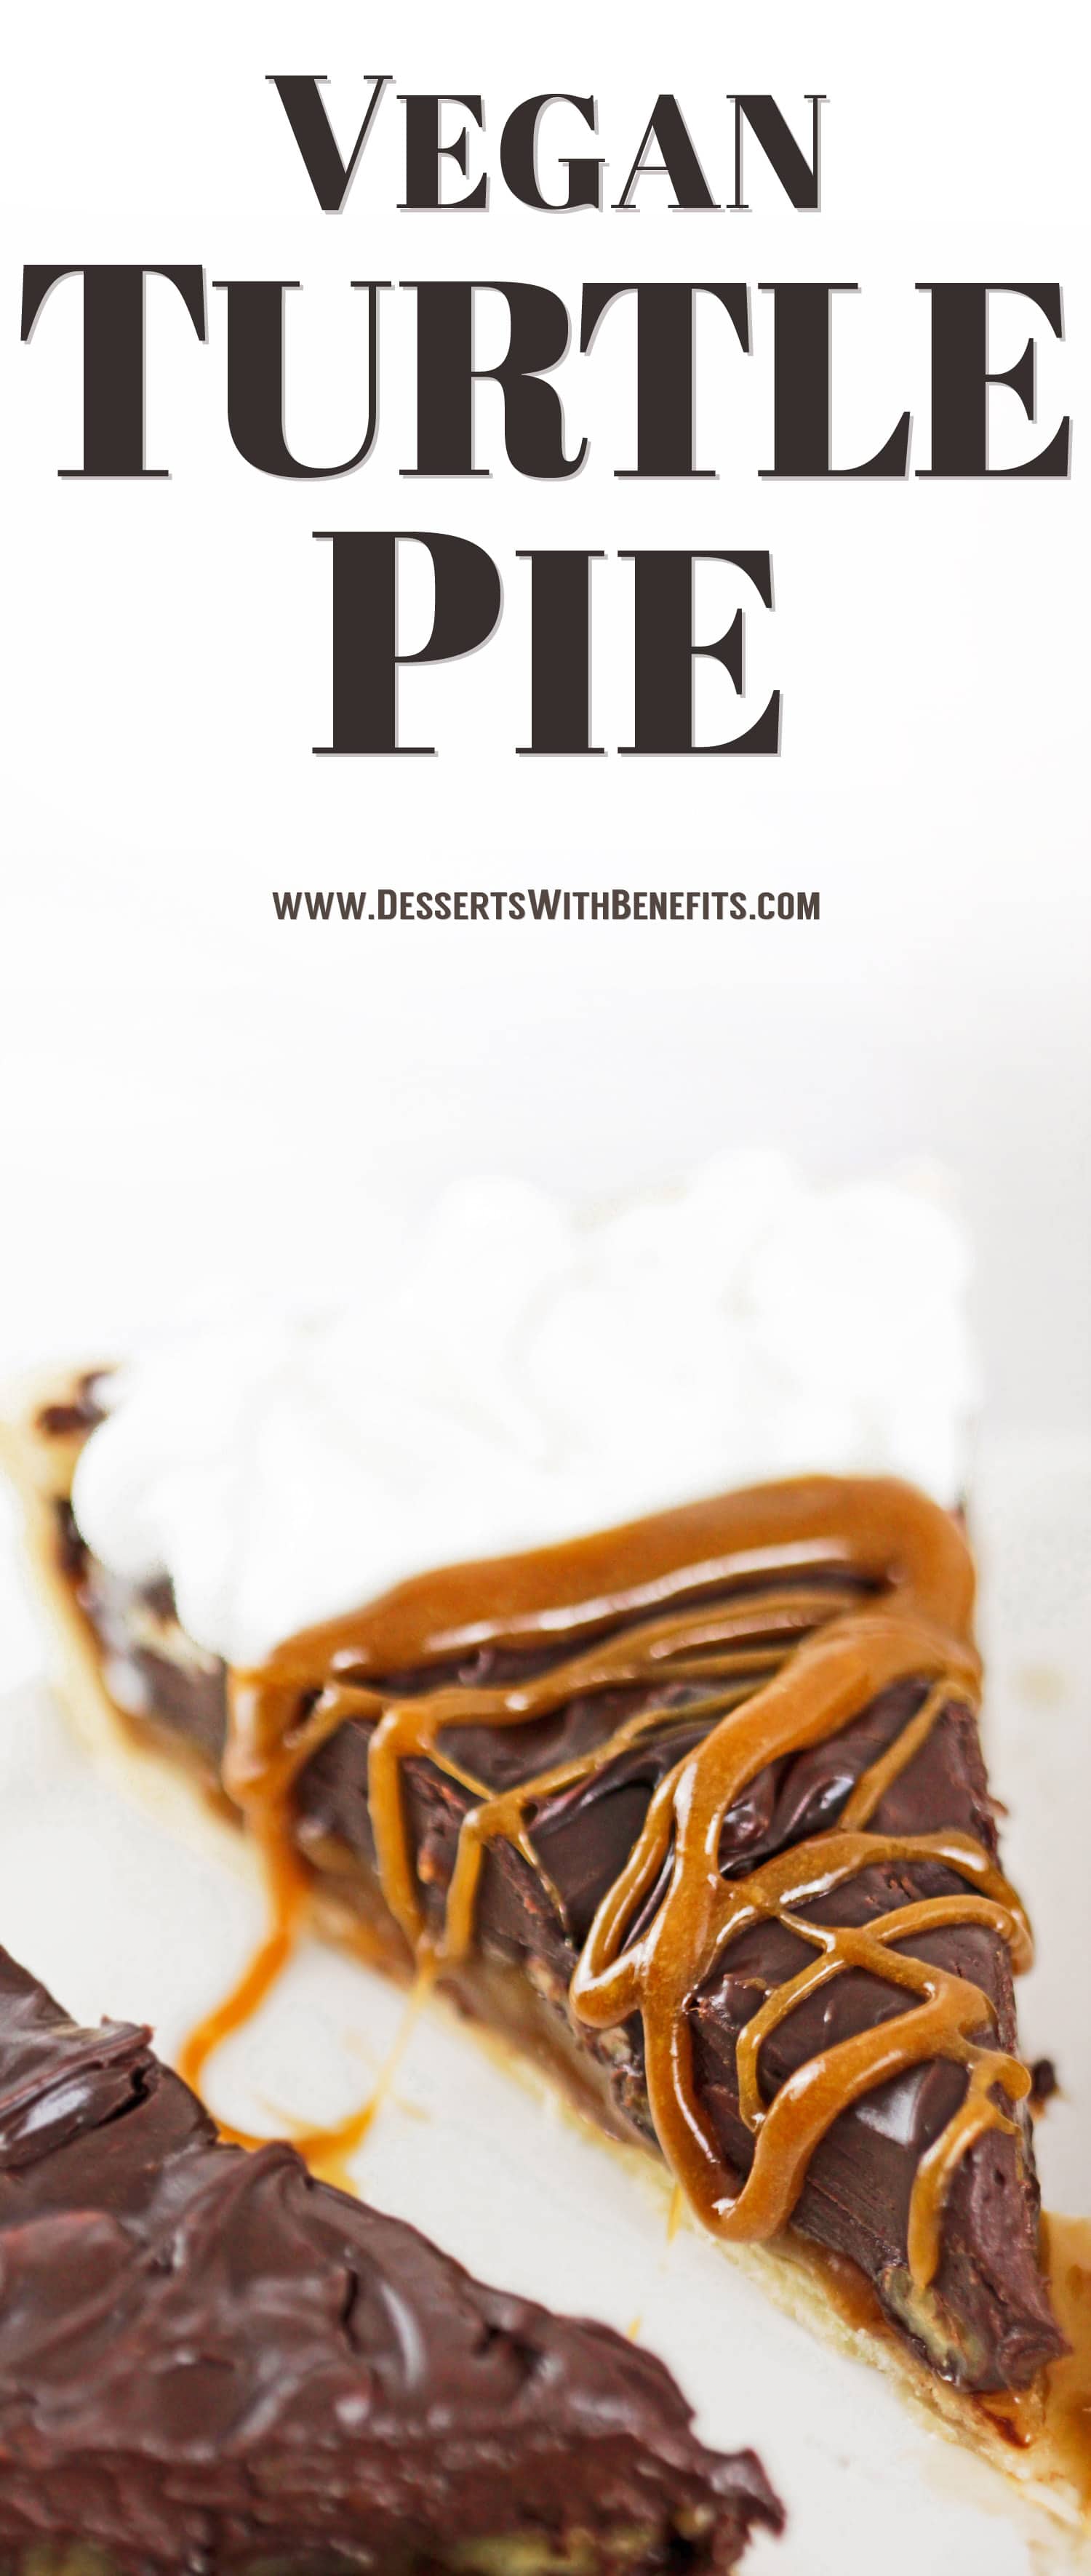 This Vegan Turtle Pie tastes so rich and decadent you’ll wonder HOW on earth it can possibly be vegan, dairy free, and all natural! From the buttery pie crust to the sweet, chewy caramel layer, to the chocolatey pecan ganache layer, you’re in for a real treat. Healthy Dessert Recipes at the Desserts With Benefits Blog (www.DessertsWithBenefits.com)